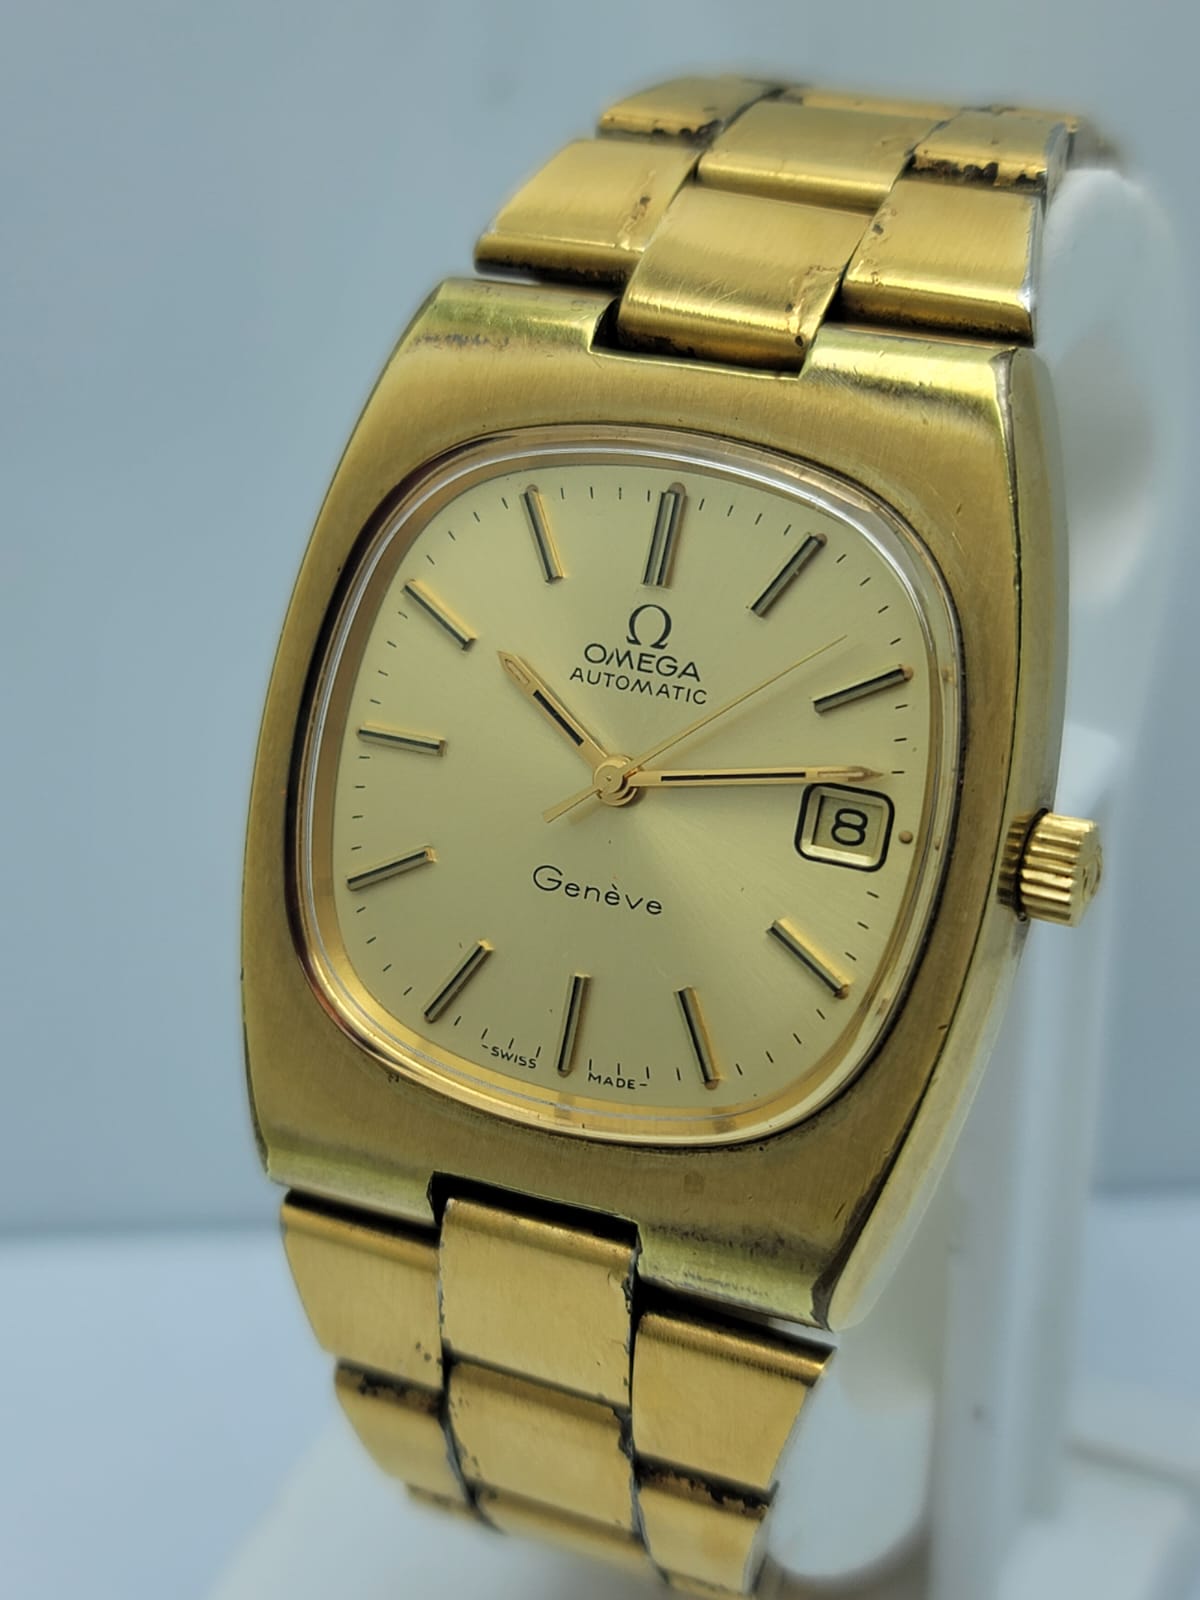 Omega Geneve Automatic 166.0191 Gold Beautiful Vintage Men’s Watch